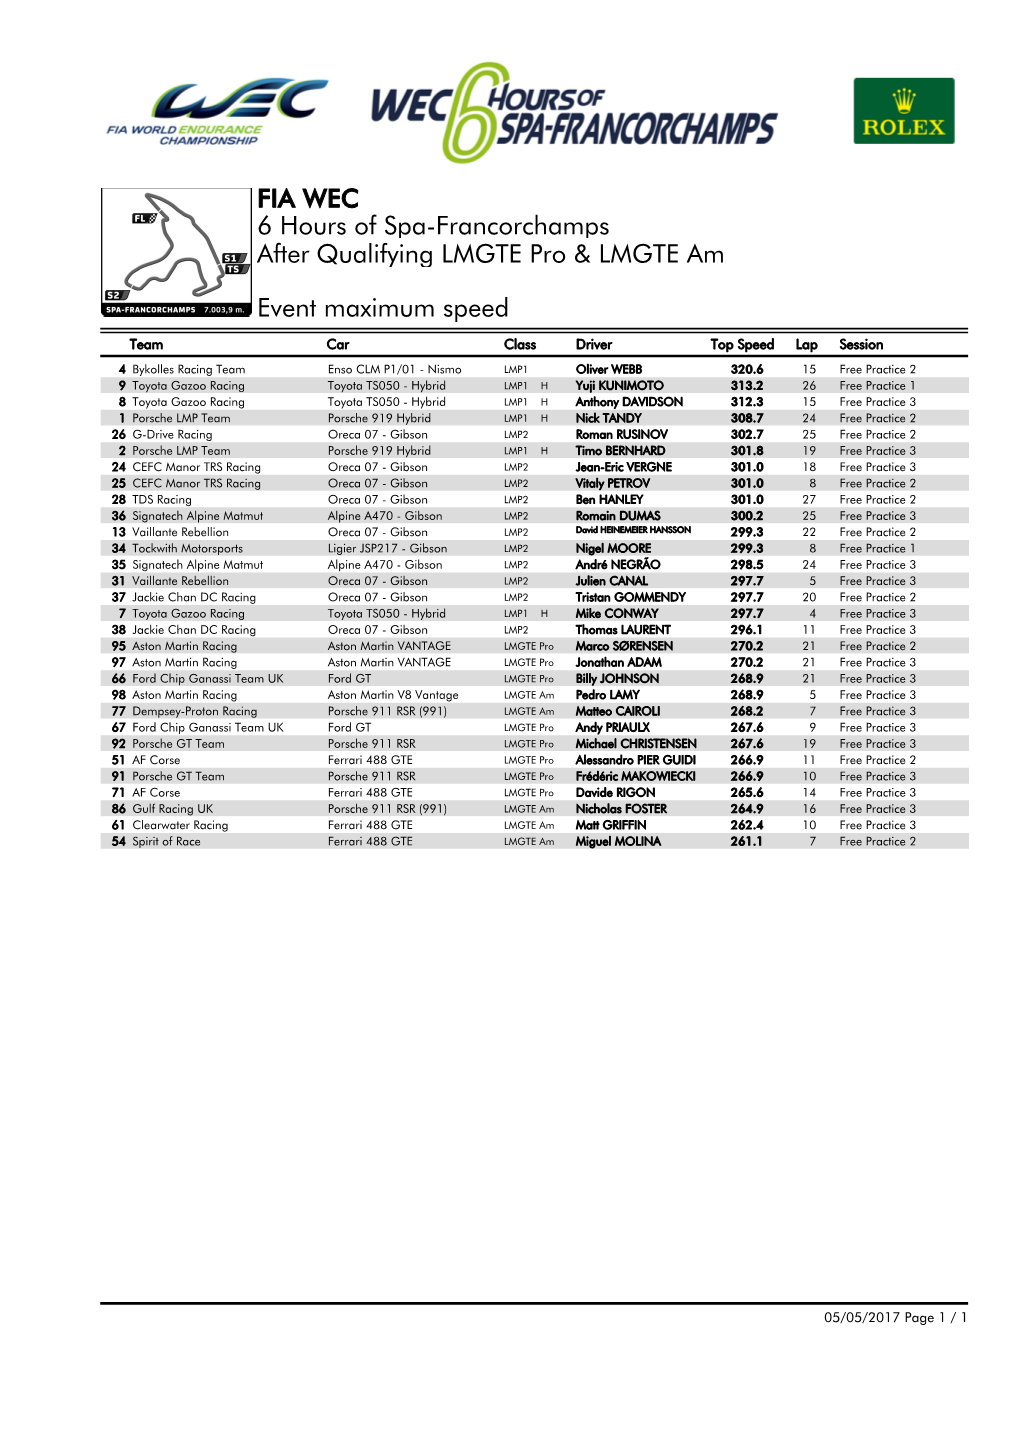 Event Maximum Speed Qualifying LMGTE Pro & LMGTE Am 6 Hours